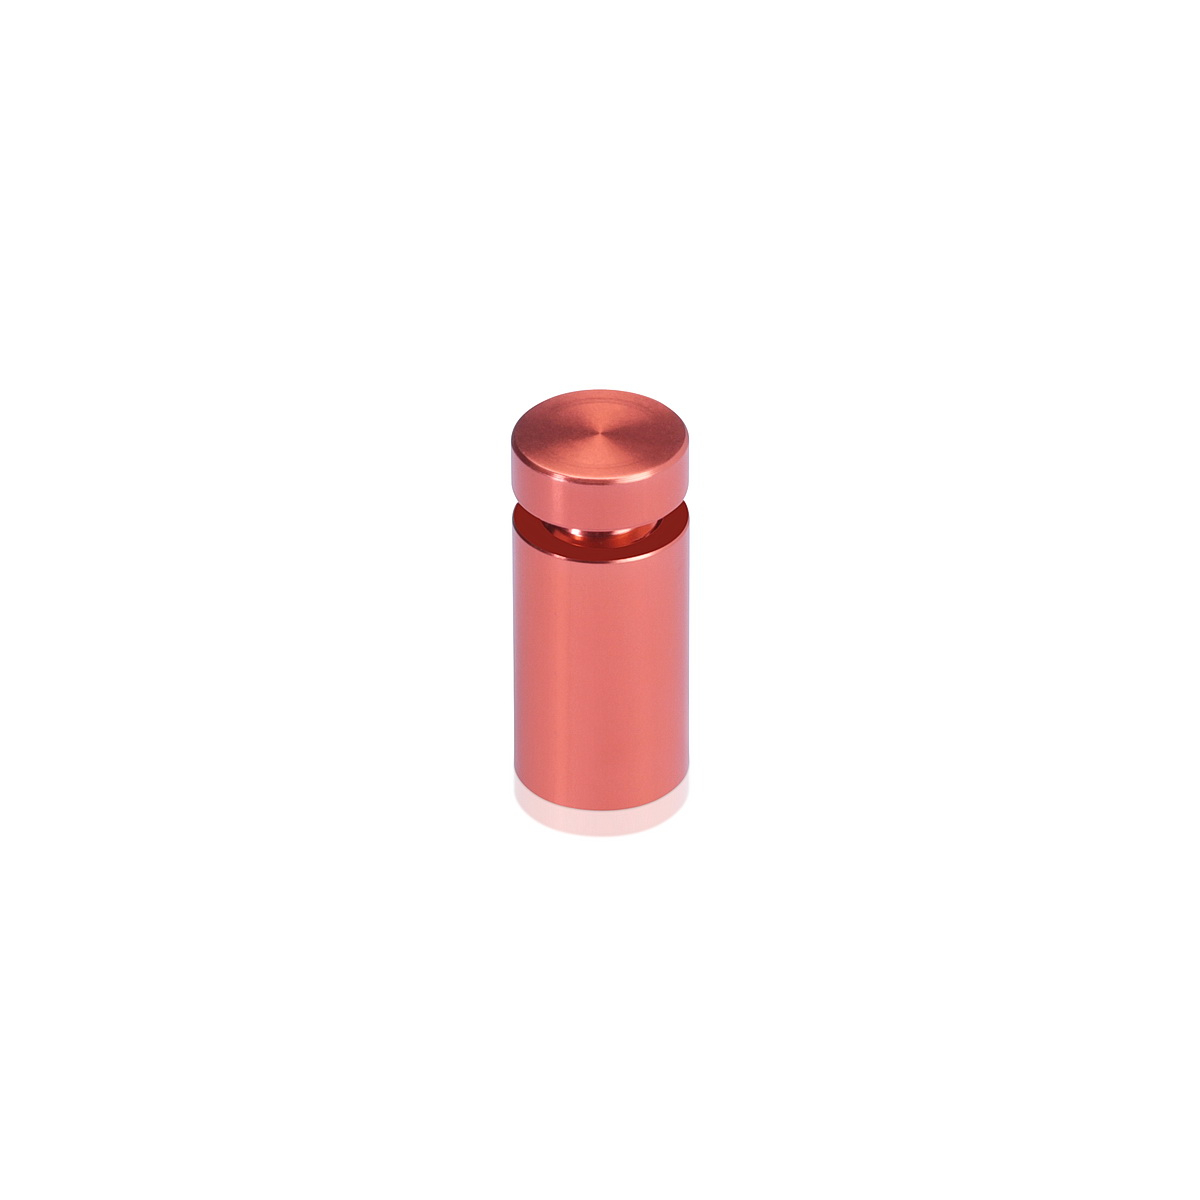 (Set of 4) 1/2'' Diameter X 3/4'' Barrel Length, Affordable Aluminum Standoffs, Copper Anodized Finish Standoff and (4) 2208Z Screw and (4) LANC1 Anchor for concrete/drywall (For Inside/Outside) [Required Material Hole Size: 3/8'']